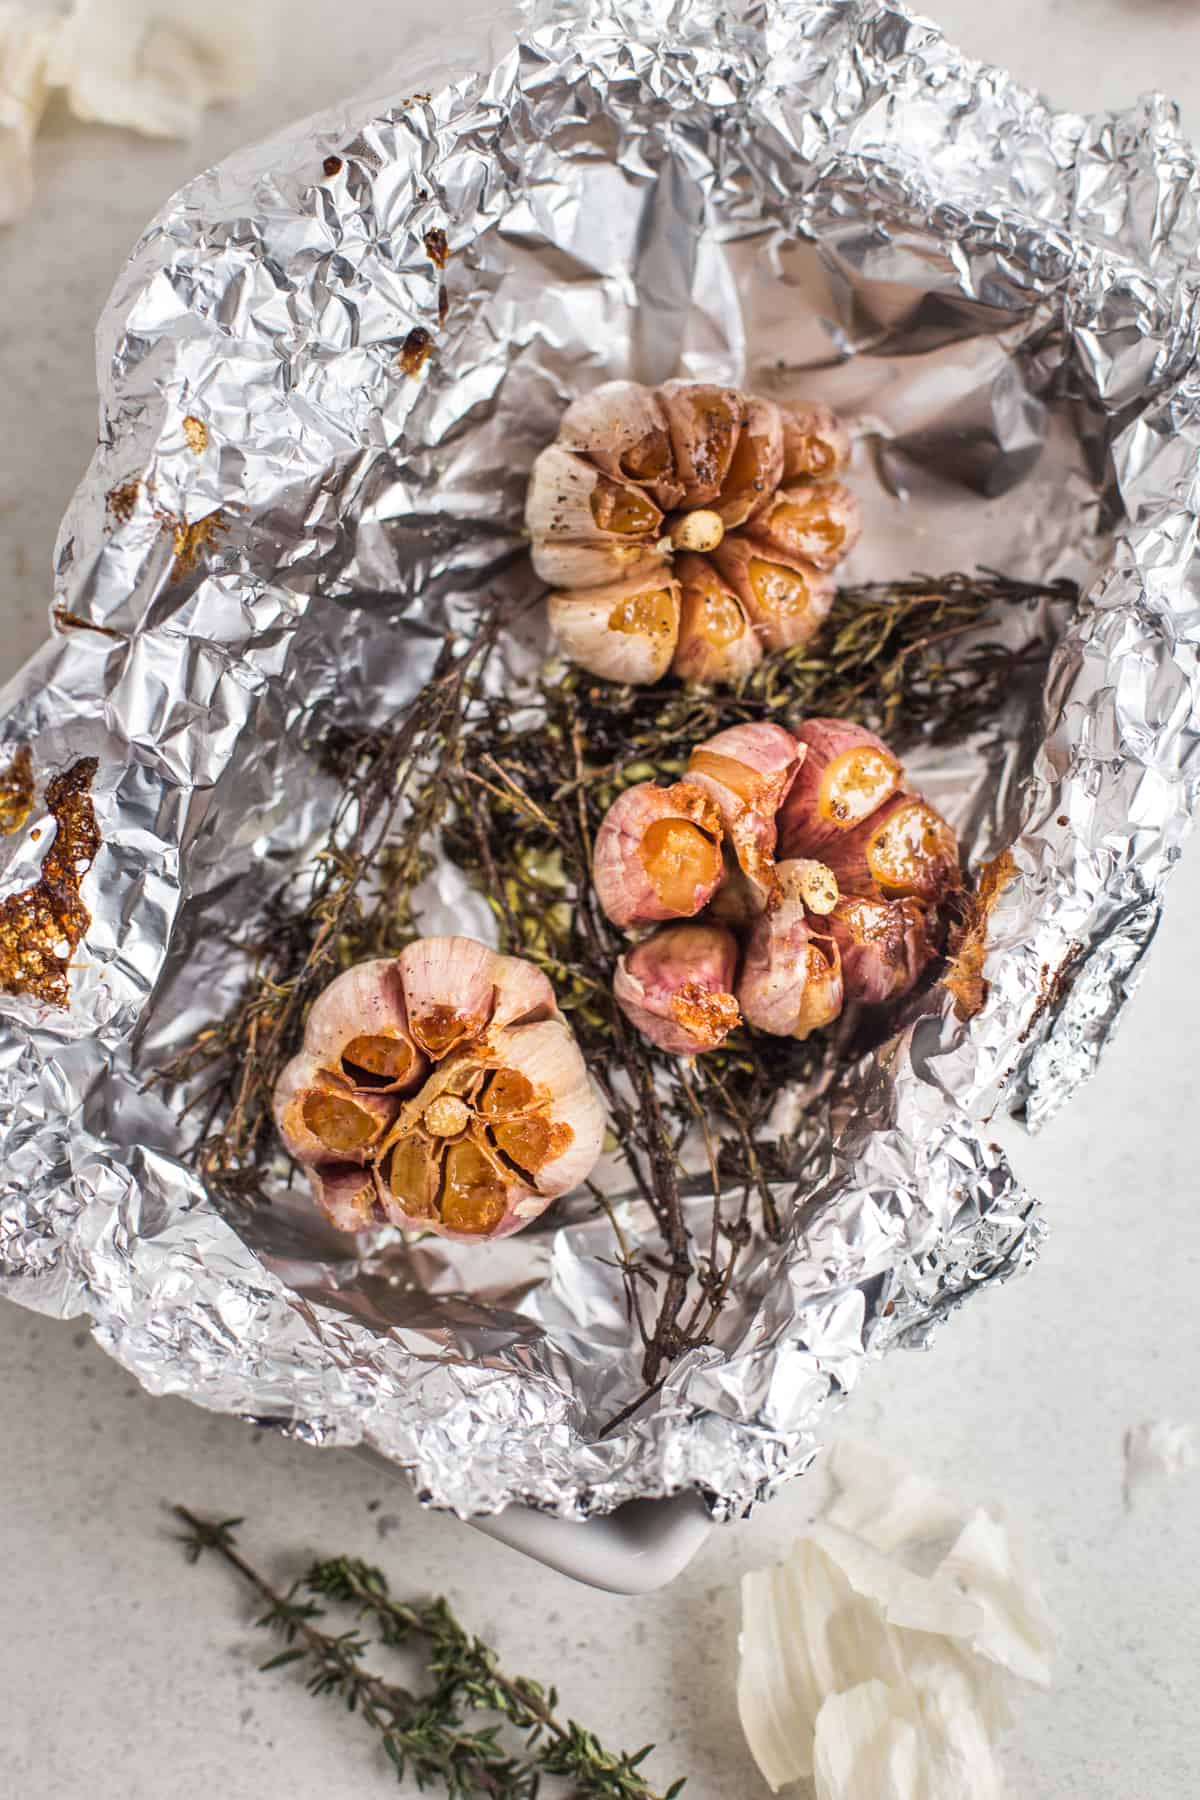 Roasted garlic on a bed of thyme in a foil lined dish.